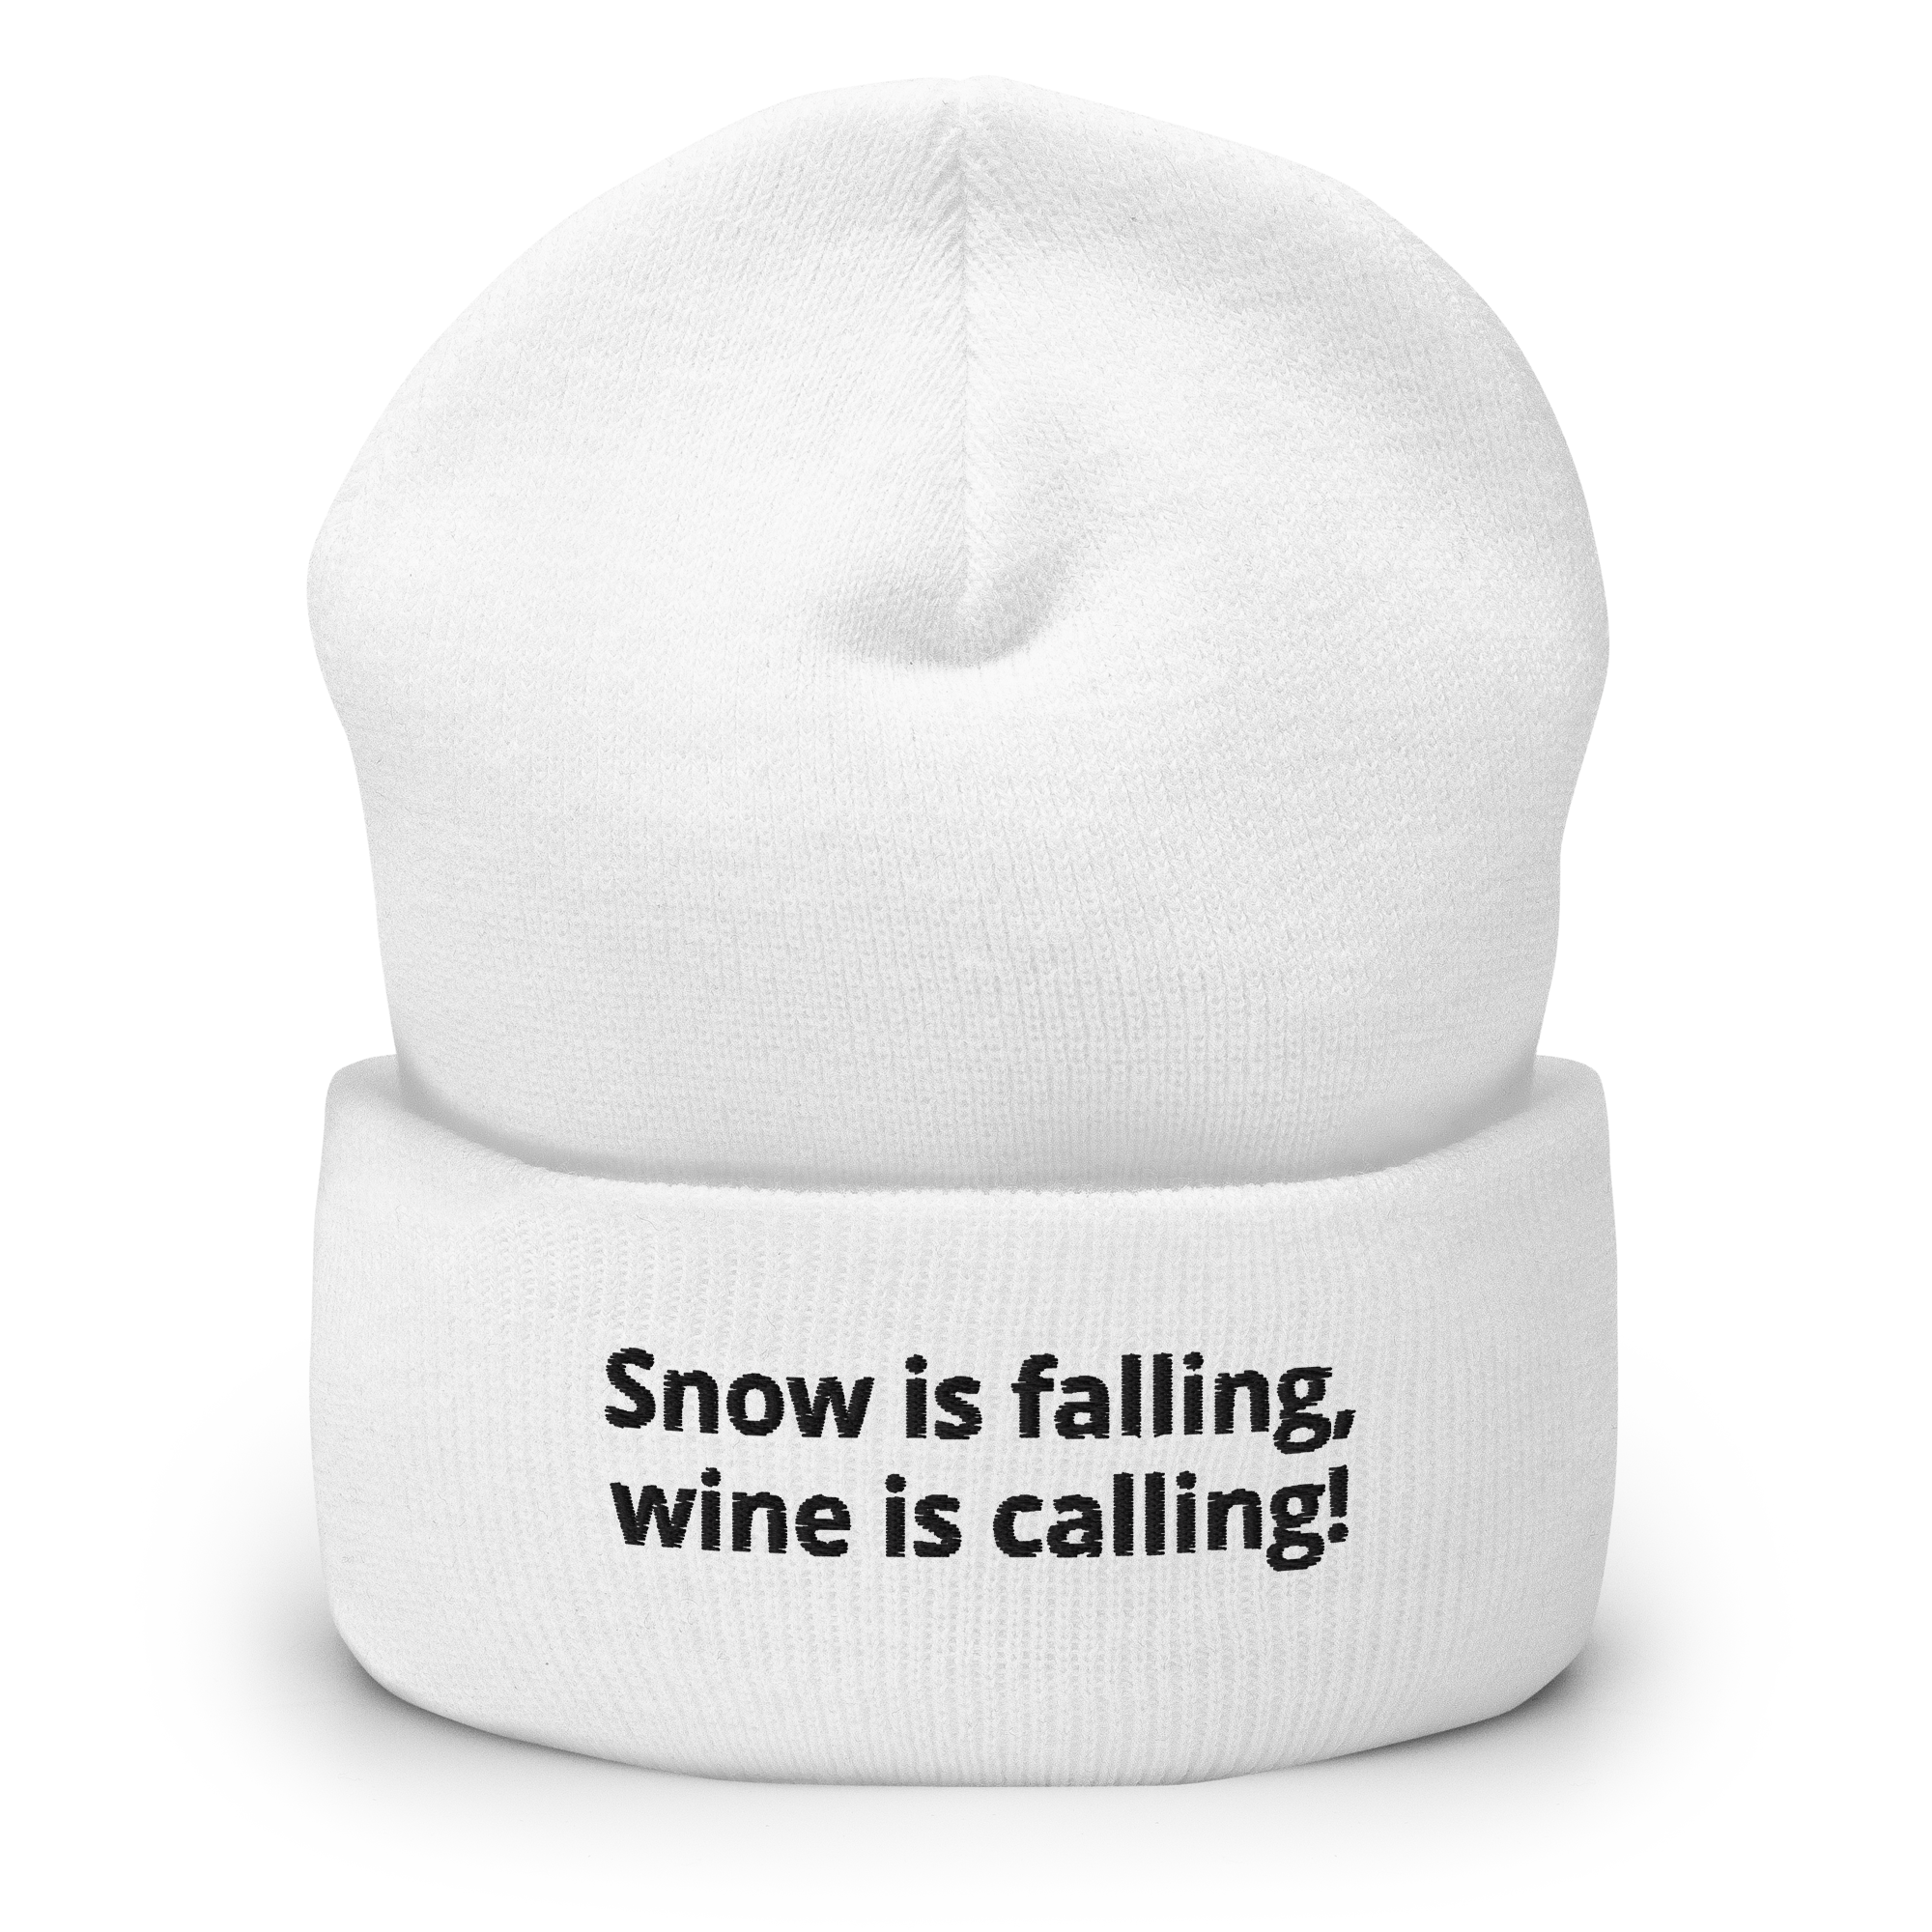 SNOW IS FALLING, WINE IS CALLING!